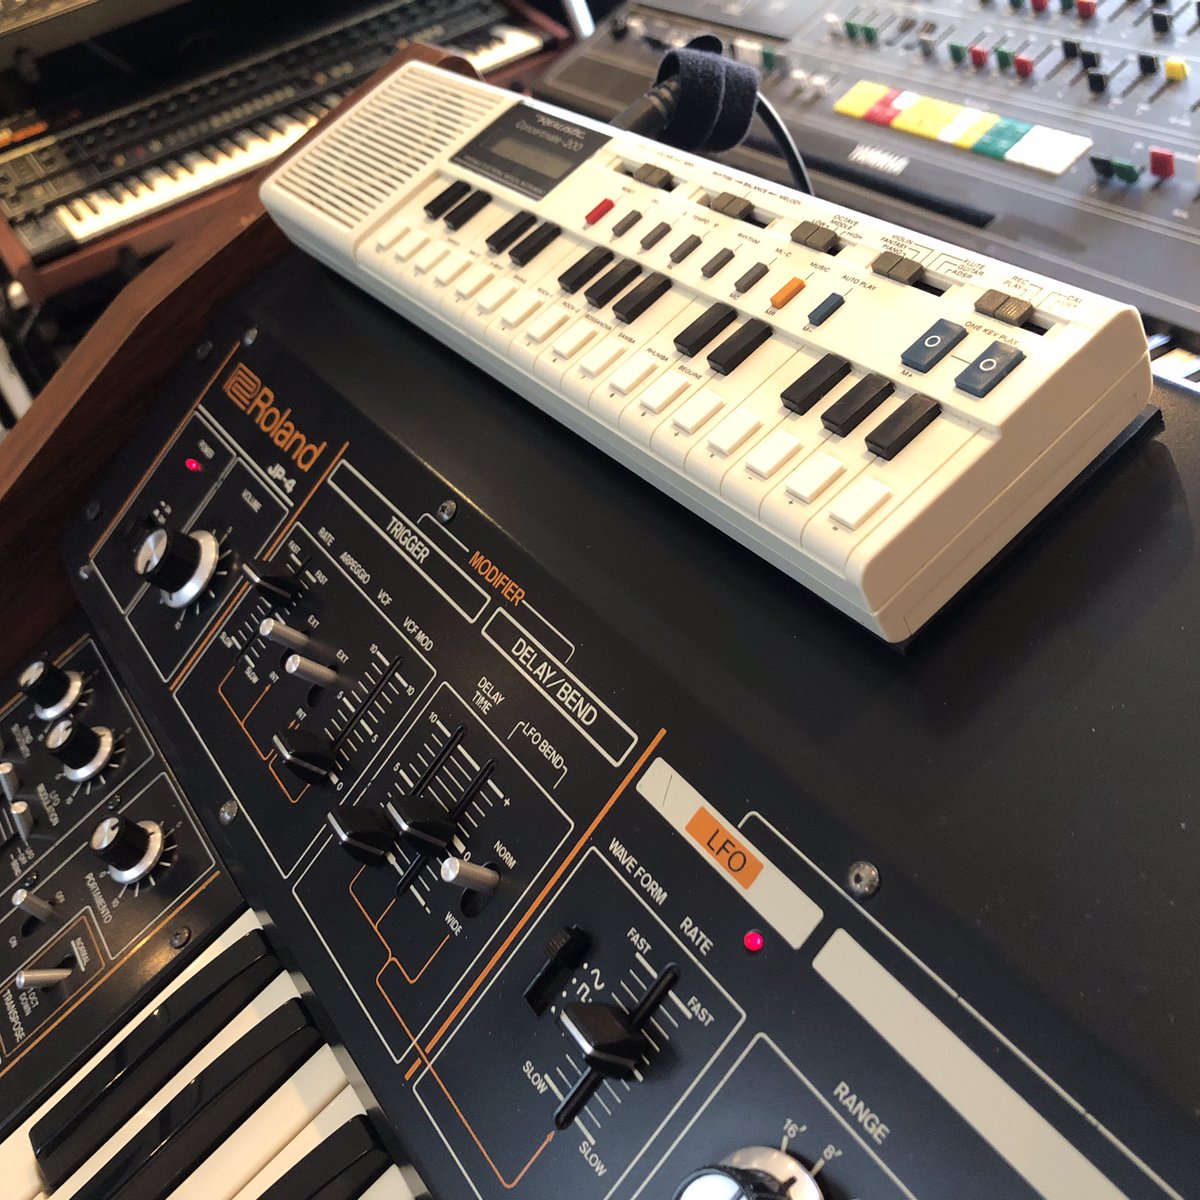 🌟🌟Recognize this synth? 🌟🌟 We used to think it was in Depeche Mode's 'Just Can't Get Enough' (who else?). Still have one? Know the real story? Tell us below! See you Saturday for a synth showdown!🔥🎹 #synth #synthesizer